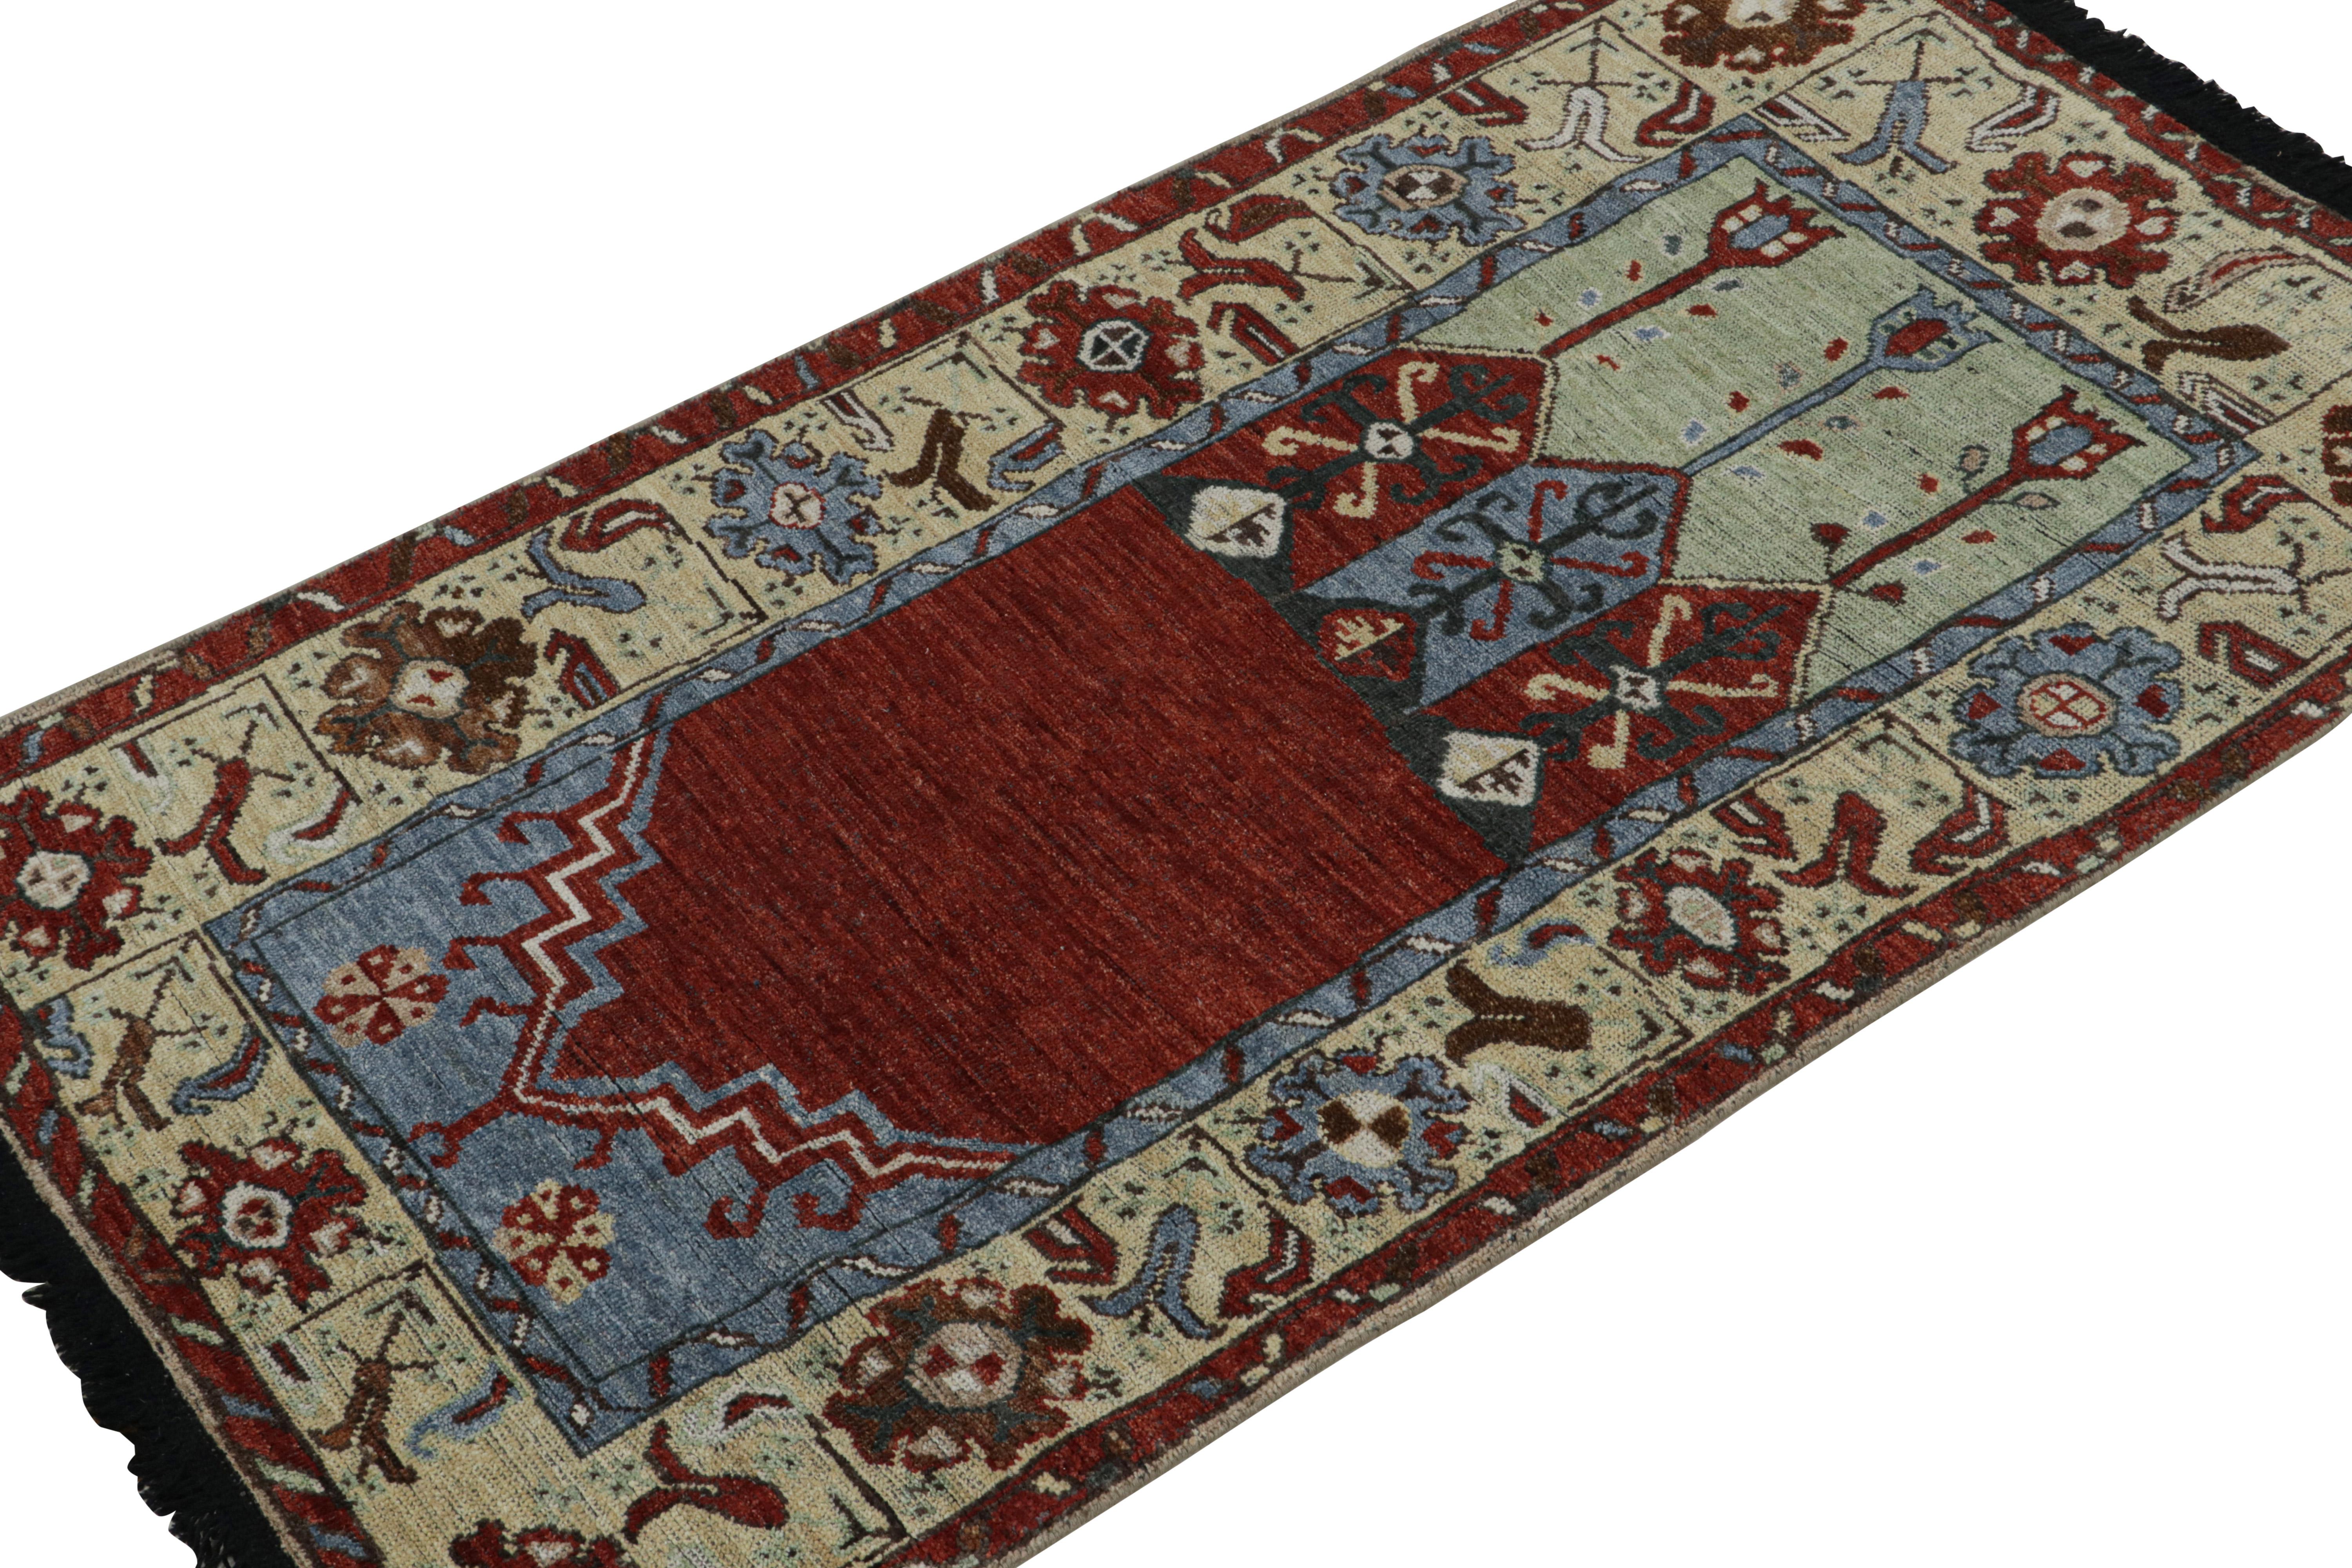 This 3x6 runner is a grand new entry to Rug & Kilim’s Burano collection. Hand-knotted in wool.

Further on the Design: 

Inspired by antique tribal runners, this rug revels in red, blue & cream with a refined traditional sensibility. The piece